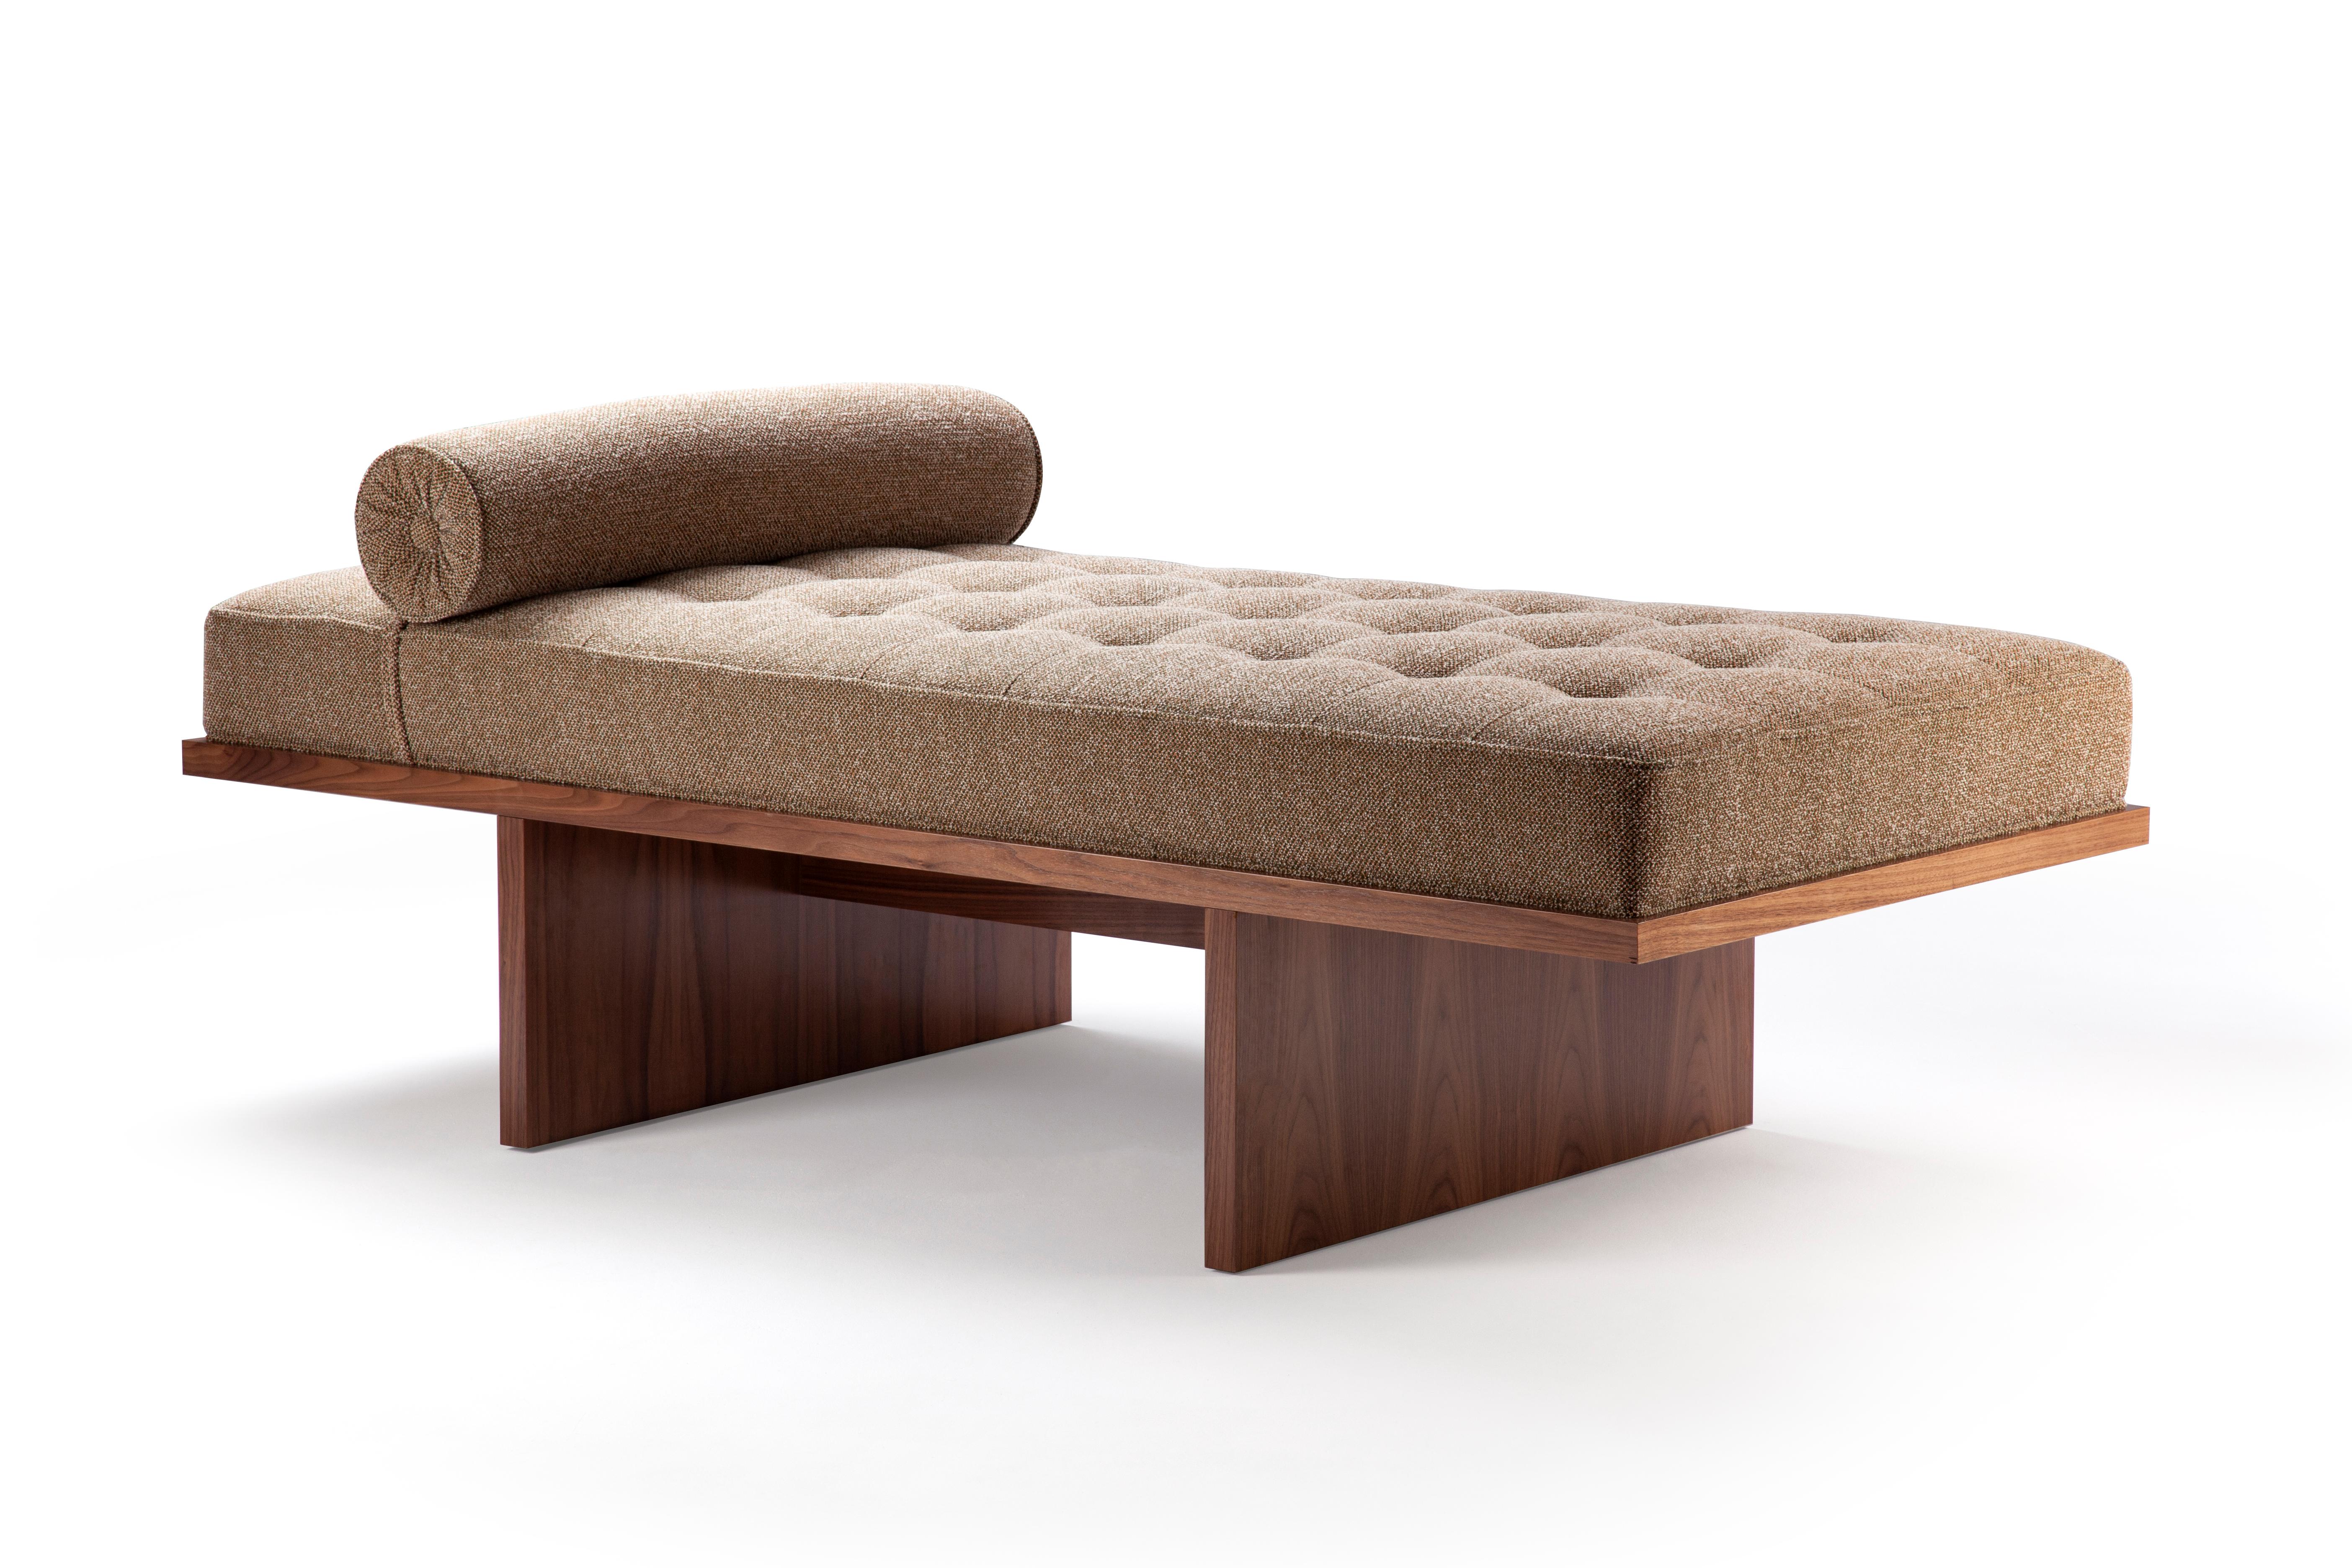 About Frederic Daybed

Frederic daybed it’s inspired by Japanese minimalism. With simple and clean structure, combined with two geometric shaped cushions that confer a modern and elegant look to this daybed.

DIMENSIONS
W 190 cm  74,8”
D 90 cm 